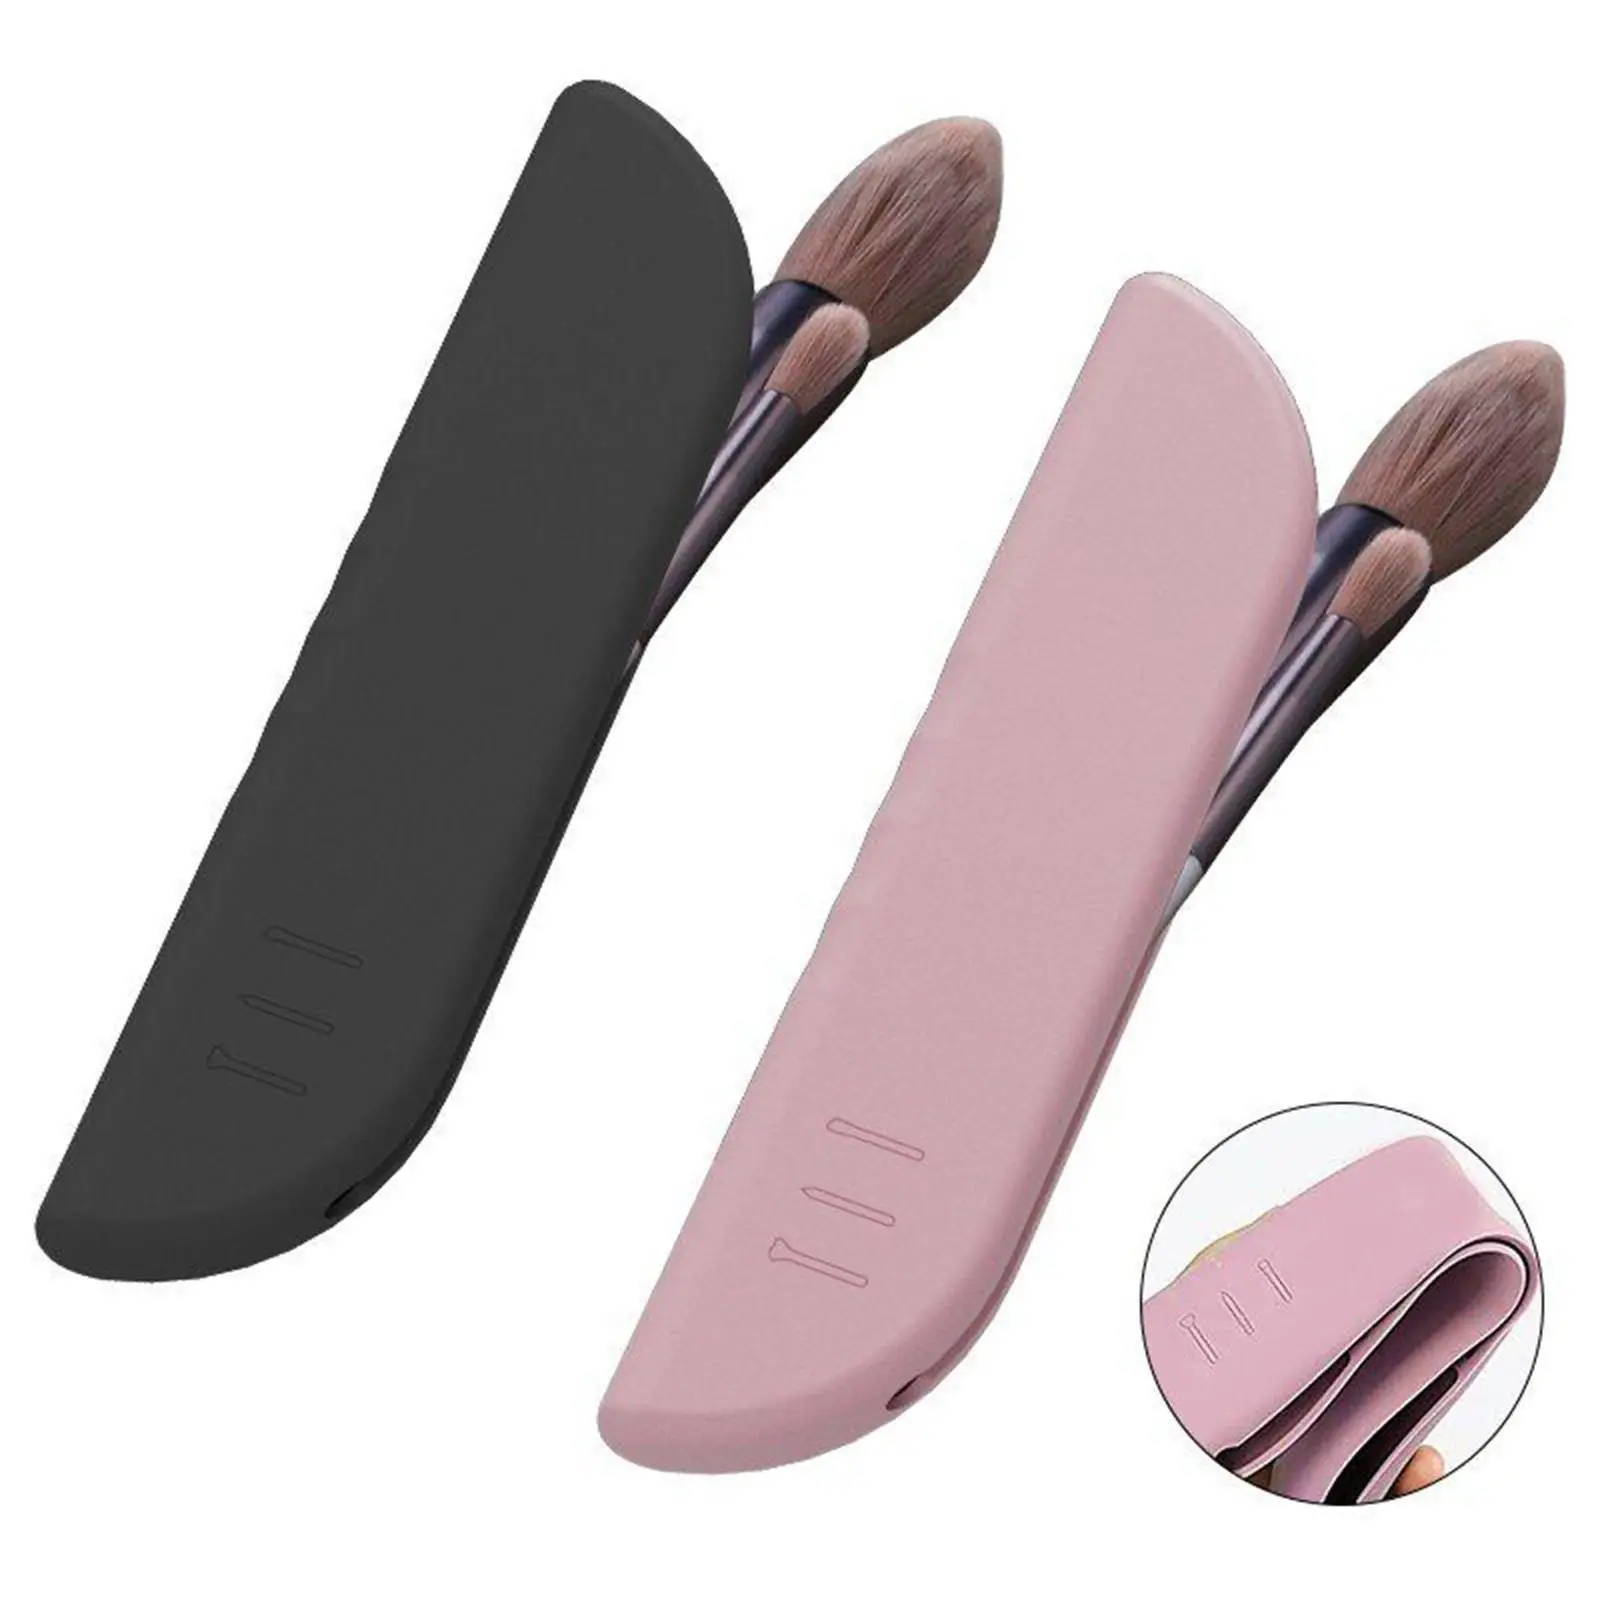 2 Pieces Silicone Makeup Brush Holder Reusable Travel Storage Case for Girlfriend